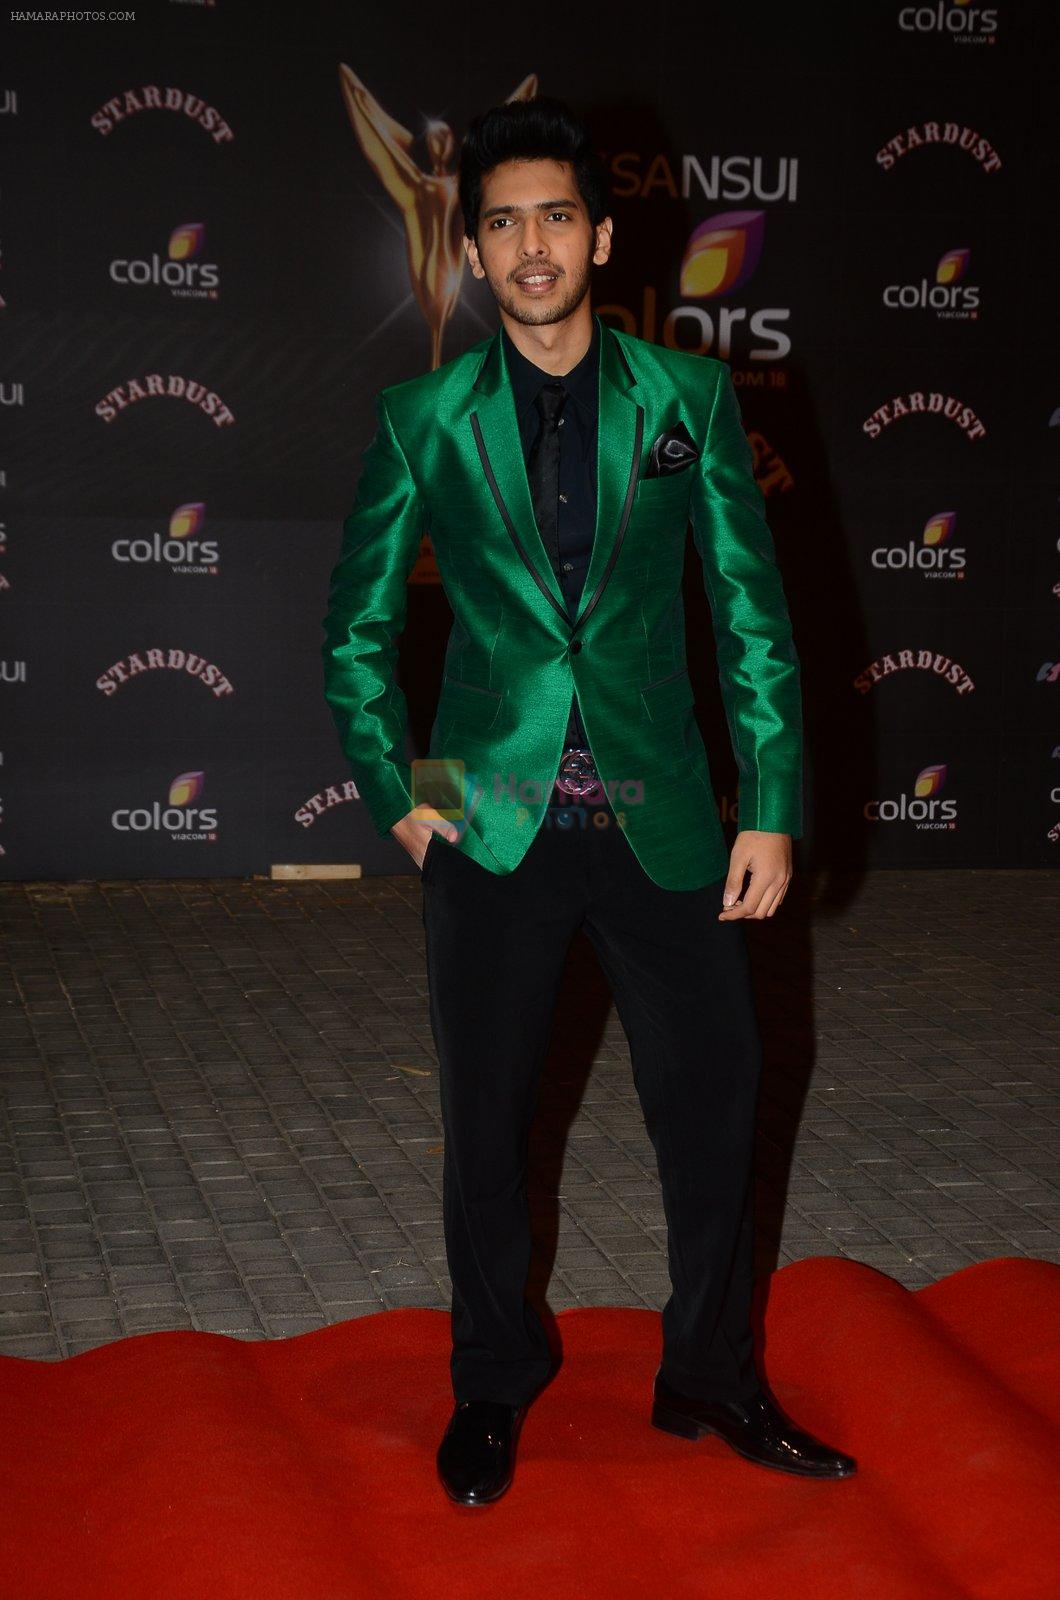 Armaan Malik at the red carpet of Stardust awards on 21st Dec 2015